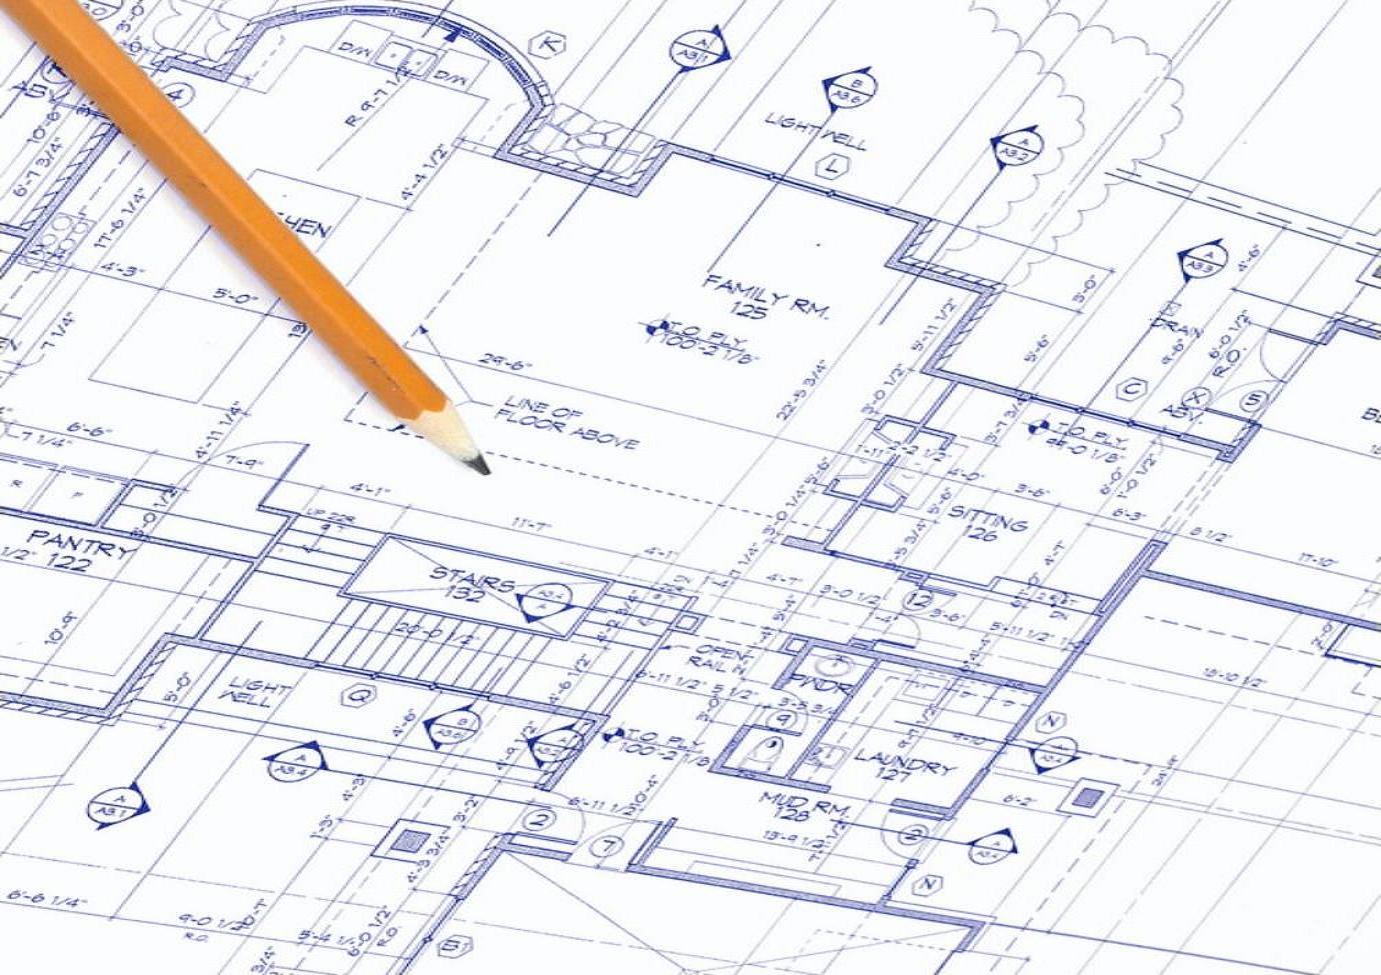 building structural design, structural engineers, forensic engineers structural inspectors